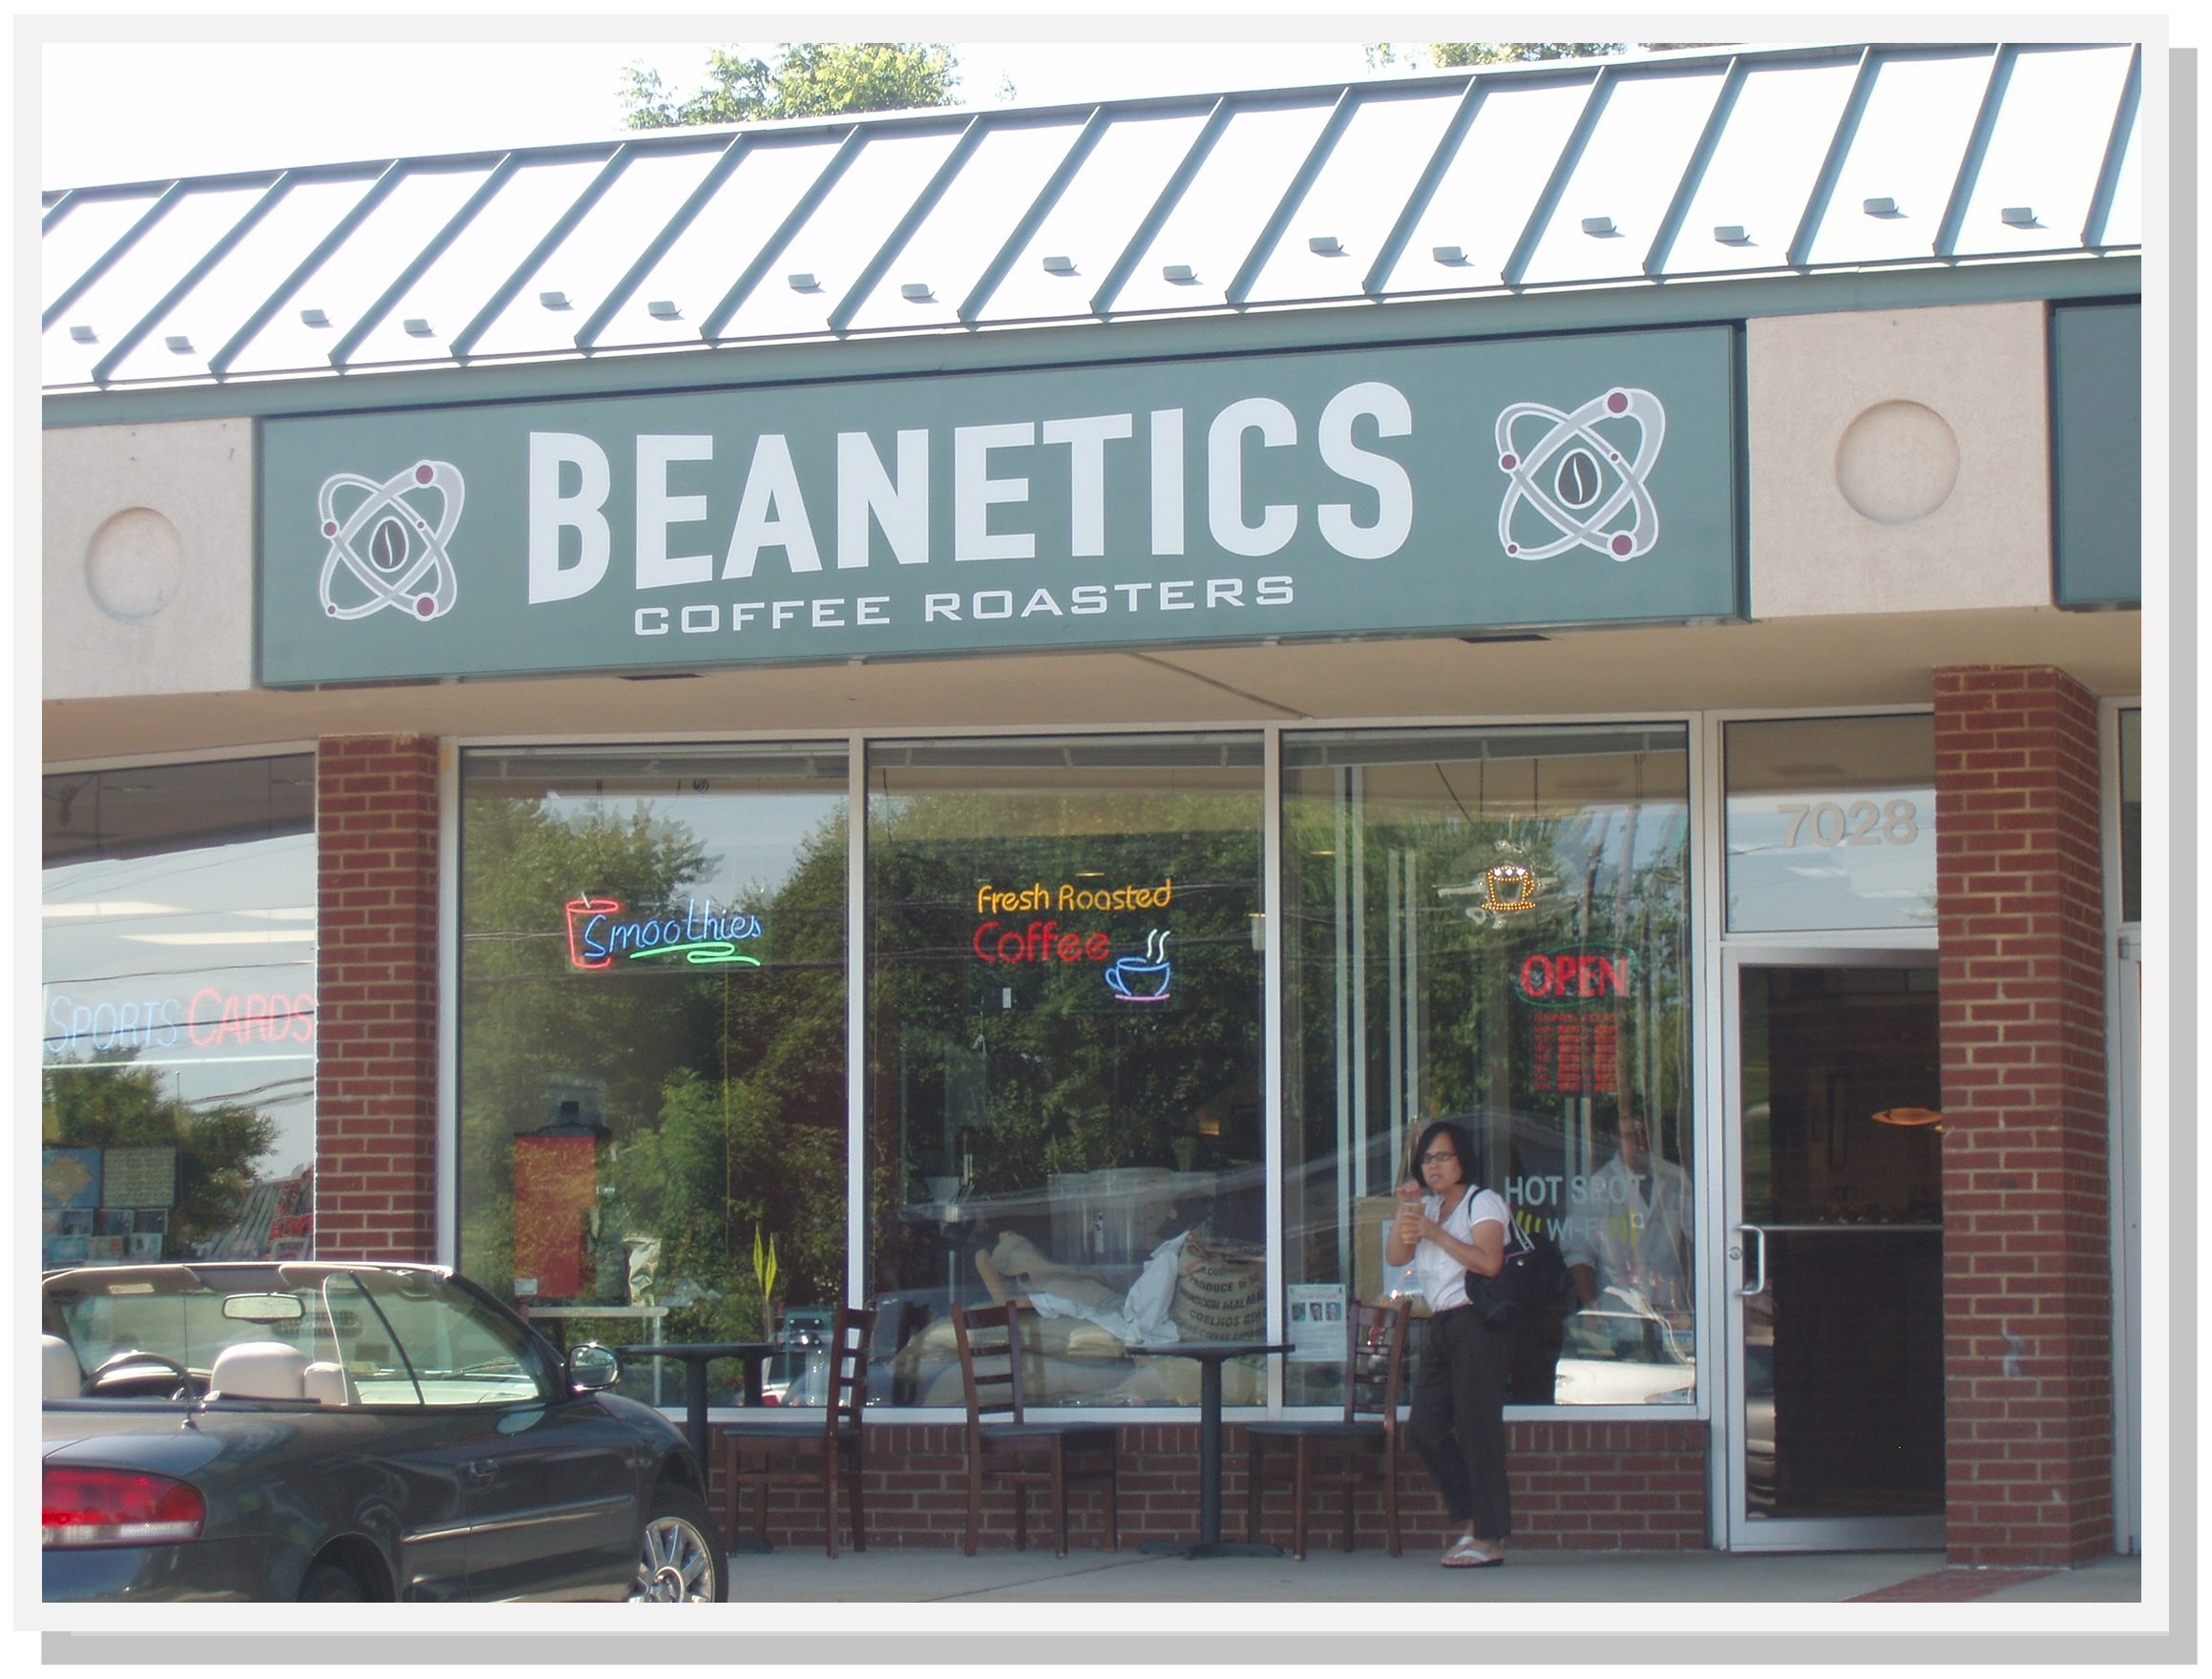 Beanetics Coffee Roasters at the ASC